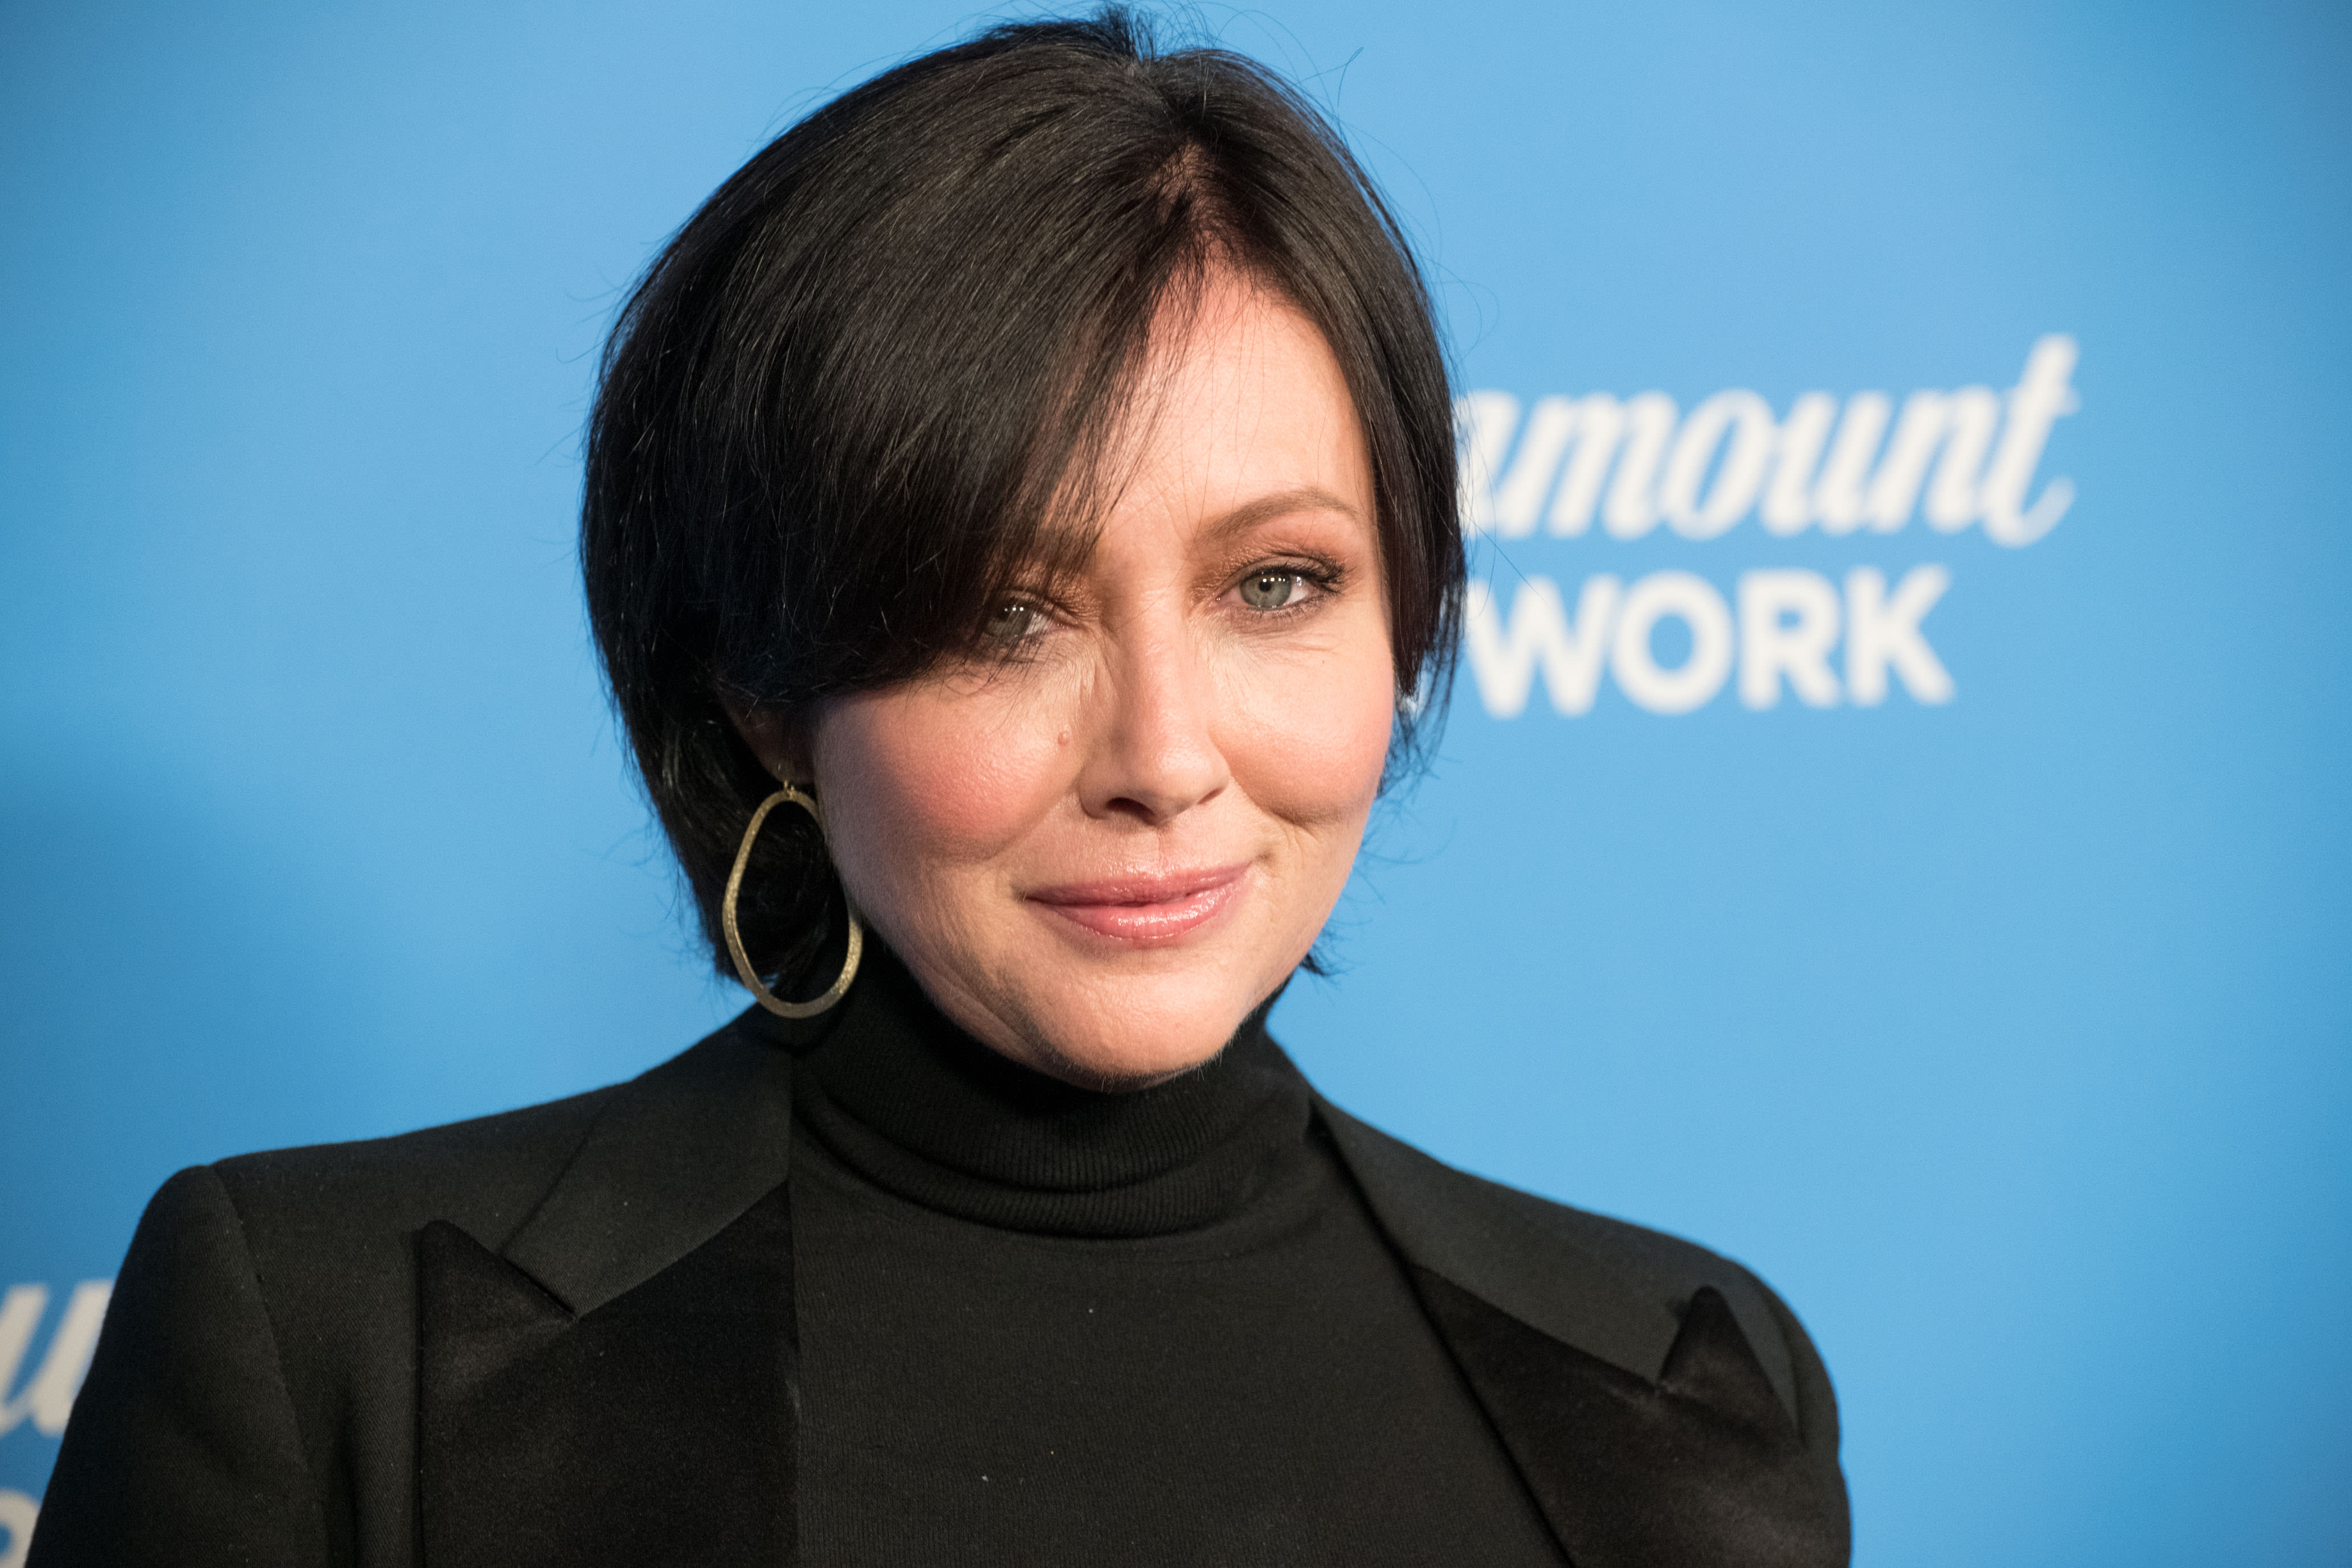 Jason Priestly, Jennie Garth, Kevin Smith and others remember Shannen Doherty